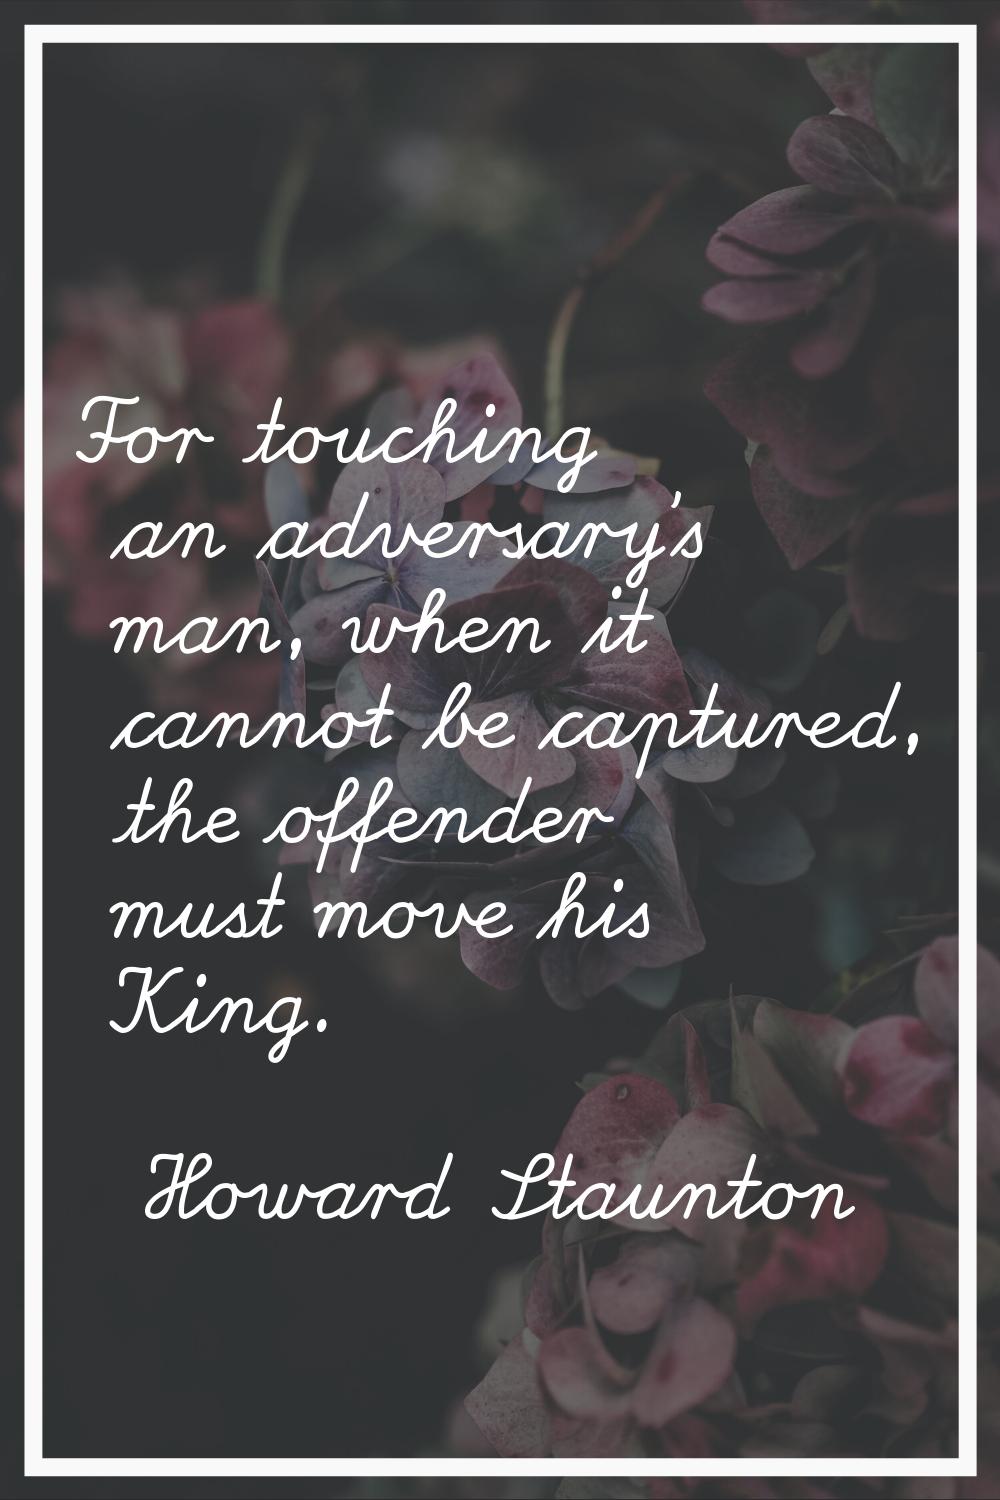 For touching an adversary's man, when it cannot be captured, the offender must move his King.